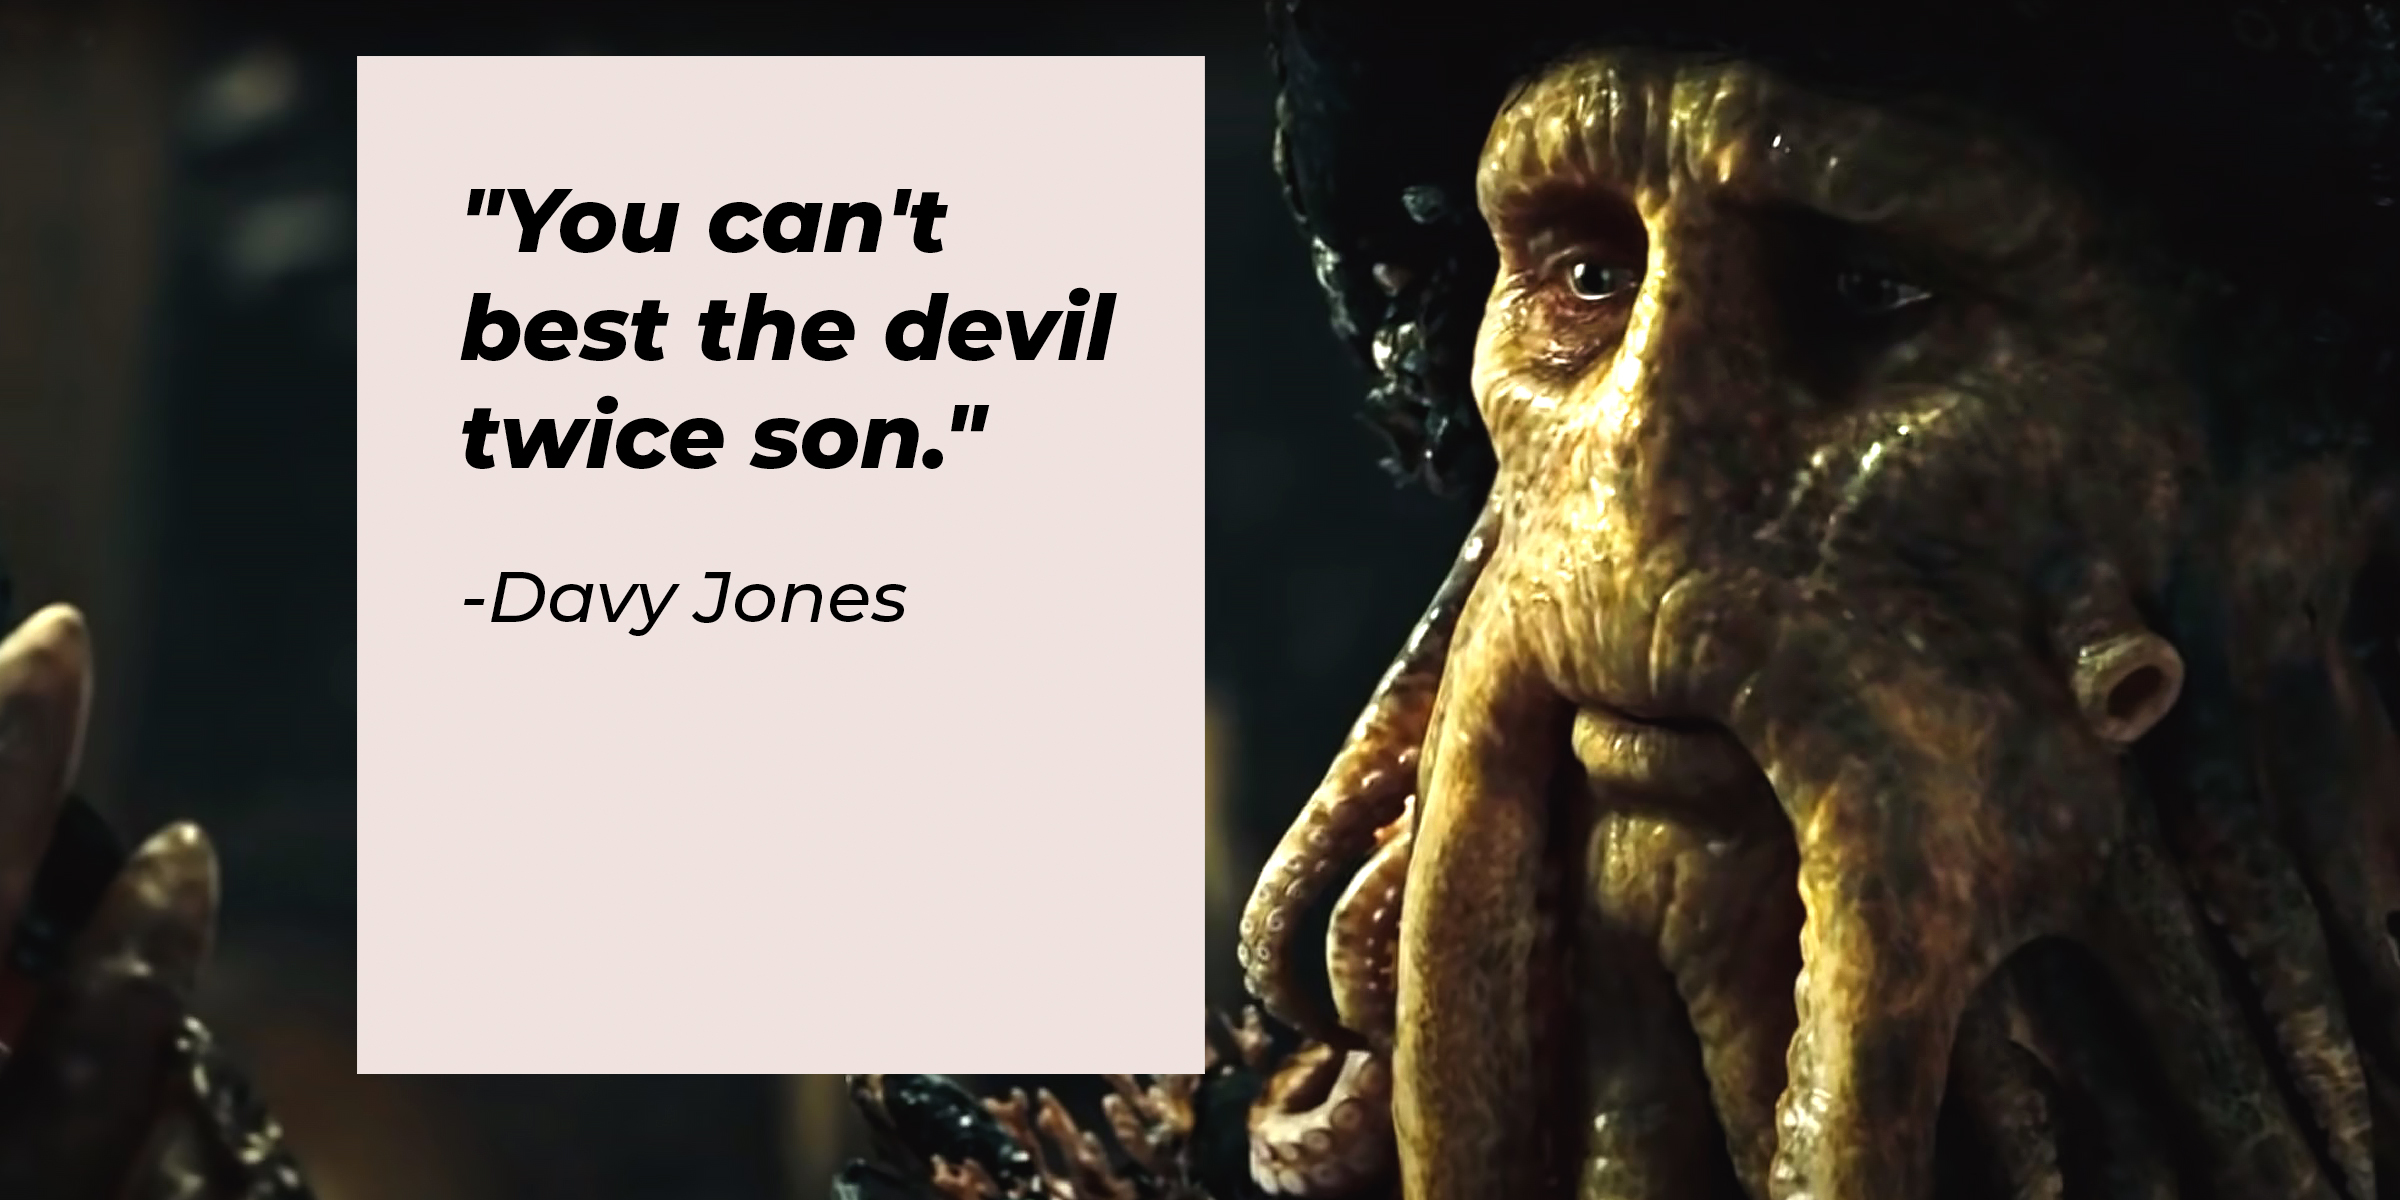 A photo of Davy Jones with his quote, "You can't best the devil twice son." | Source: Youtube/DisneyMovieTrailers